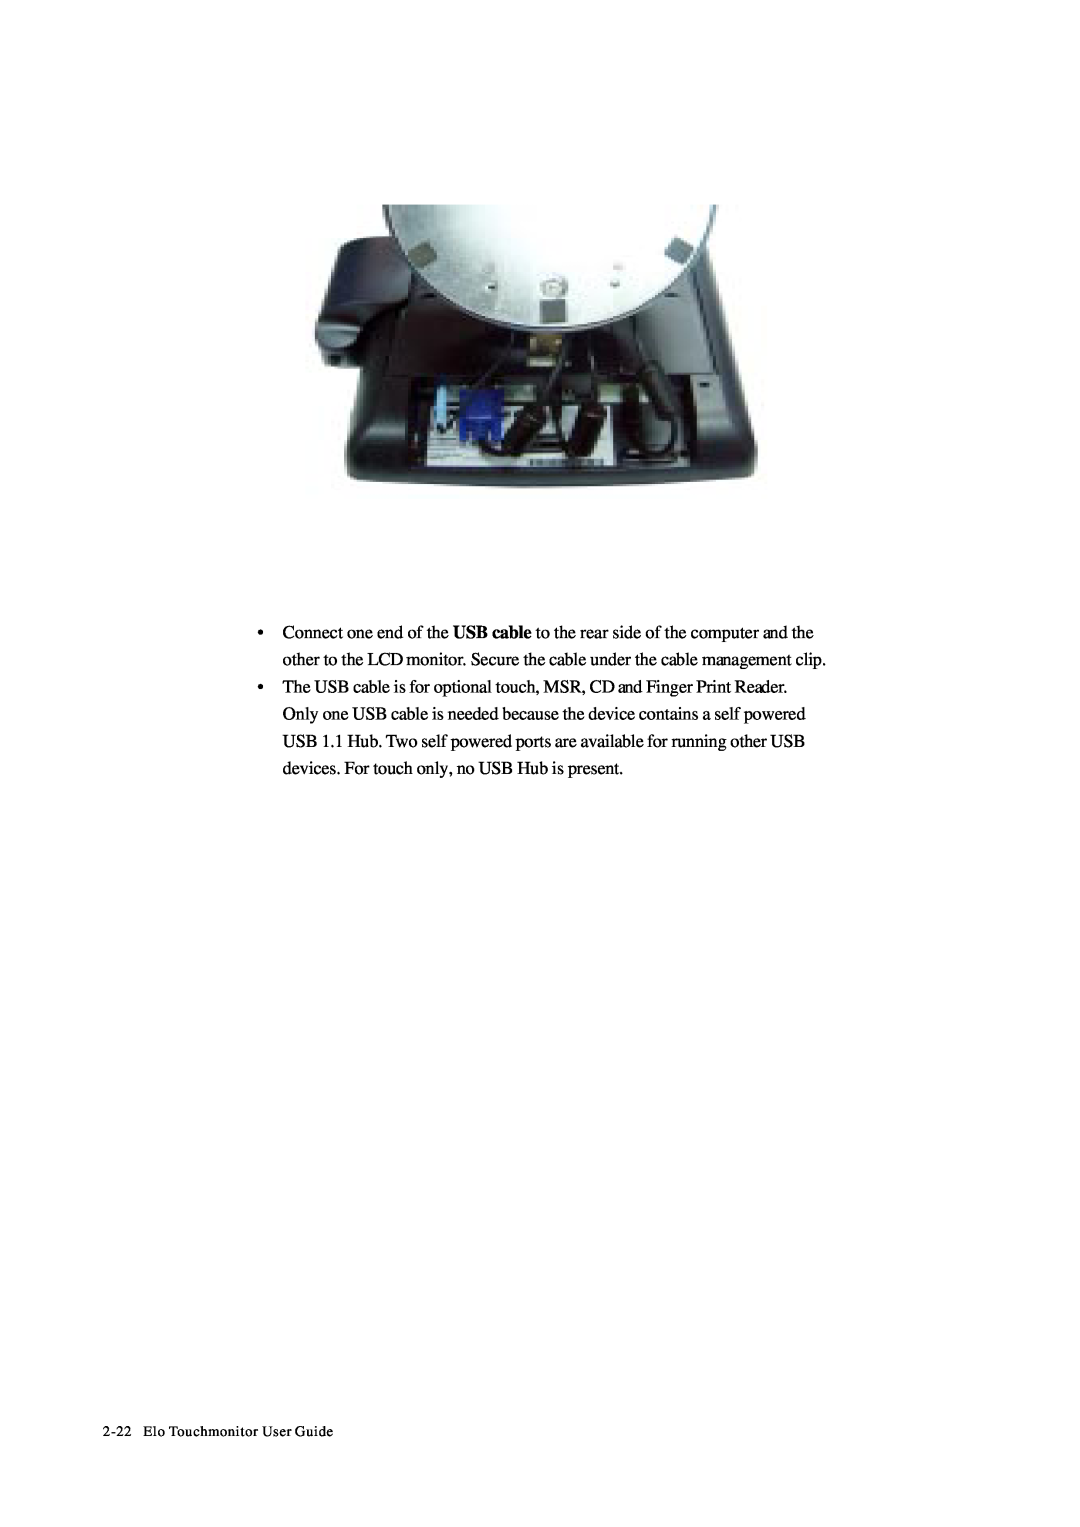 Tyco Electronics 1229L manual Elo Touchmonitor User Guide 